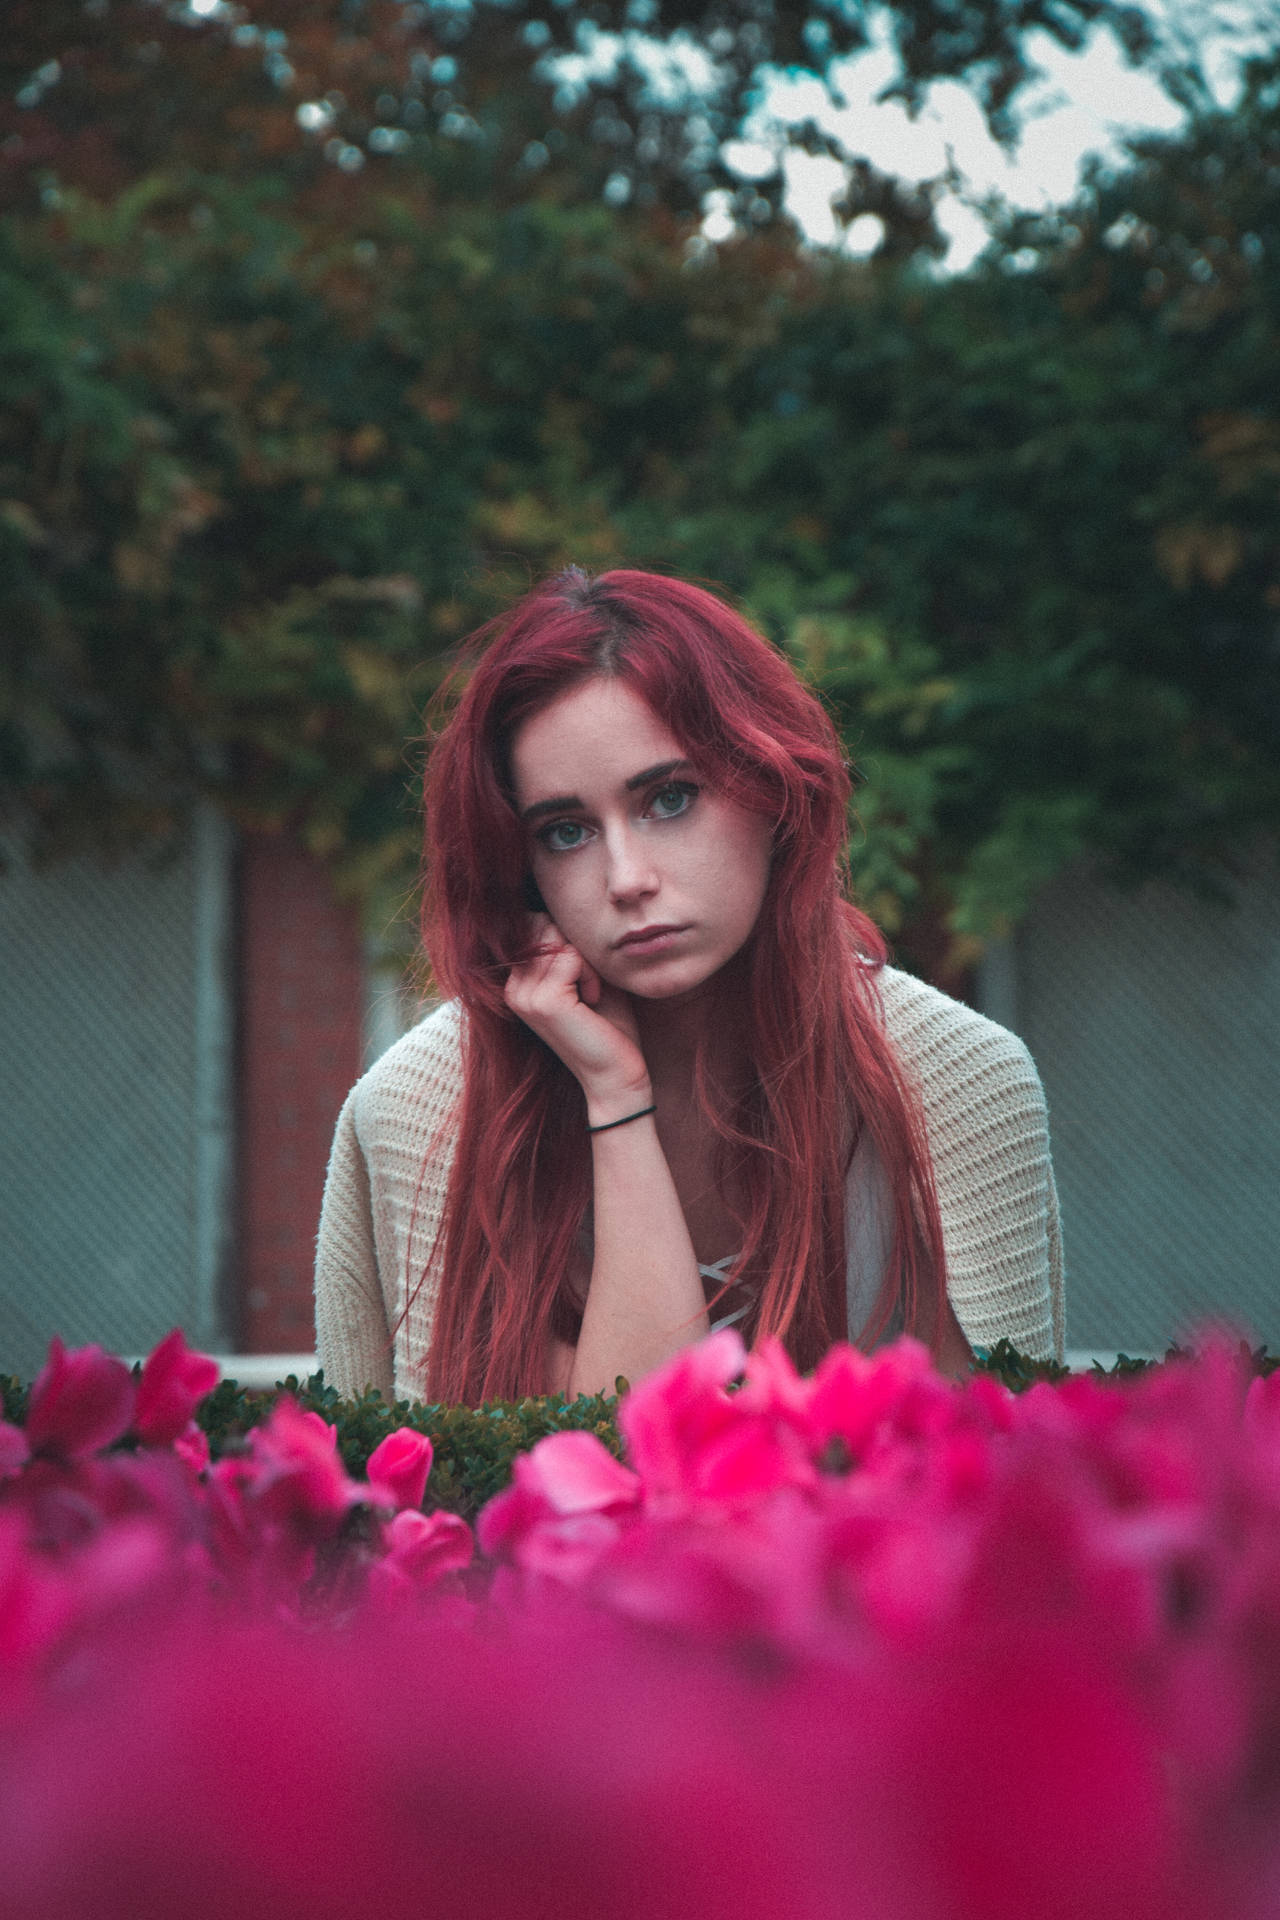 Cool Sad Girl With Flowers